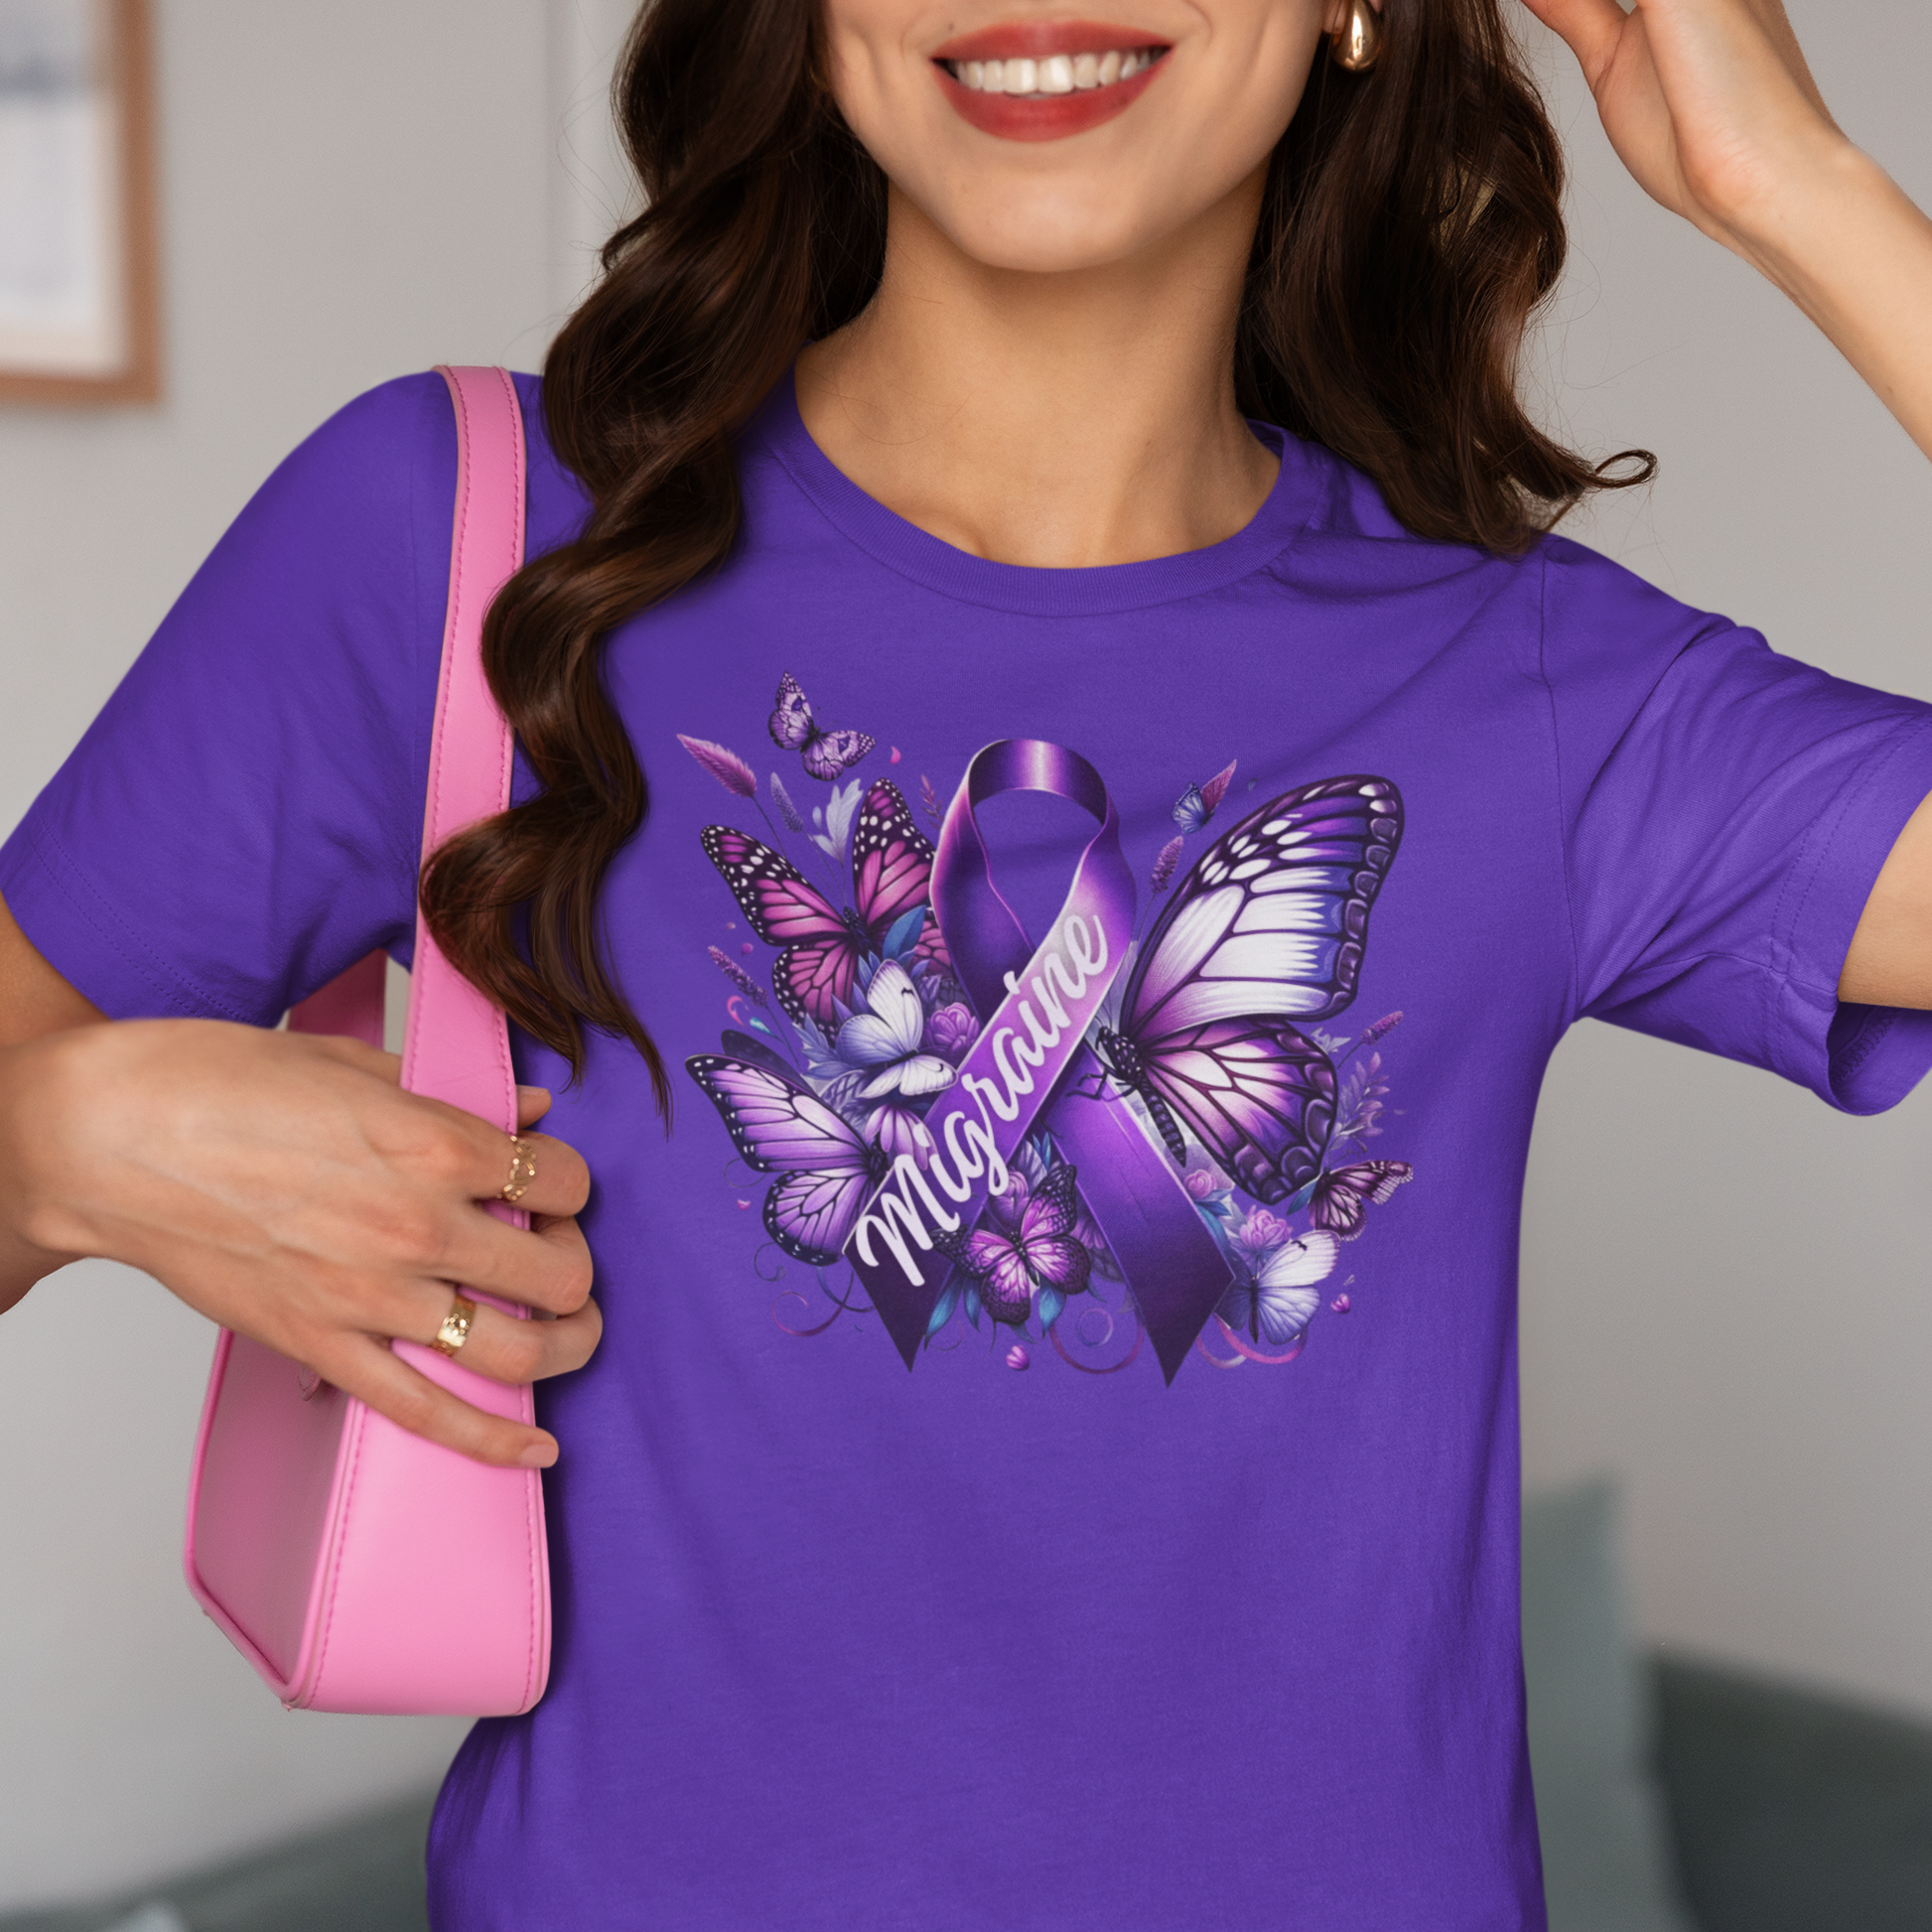 Woman with dark hair and red lipstick carrying a pink purse is wearing a purple Migraine Awareness t-shirt with a purple Migraine ribbon and butterflies and flowers